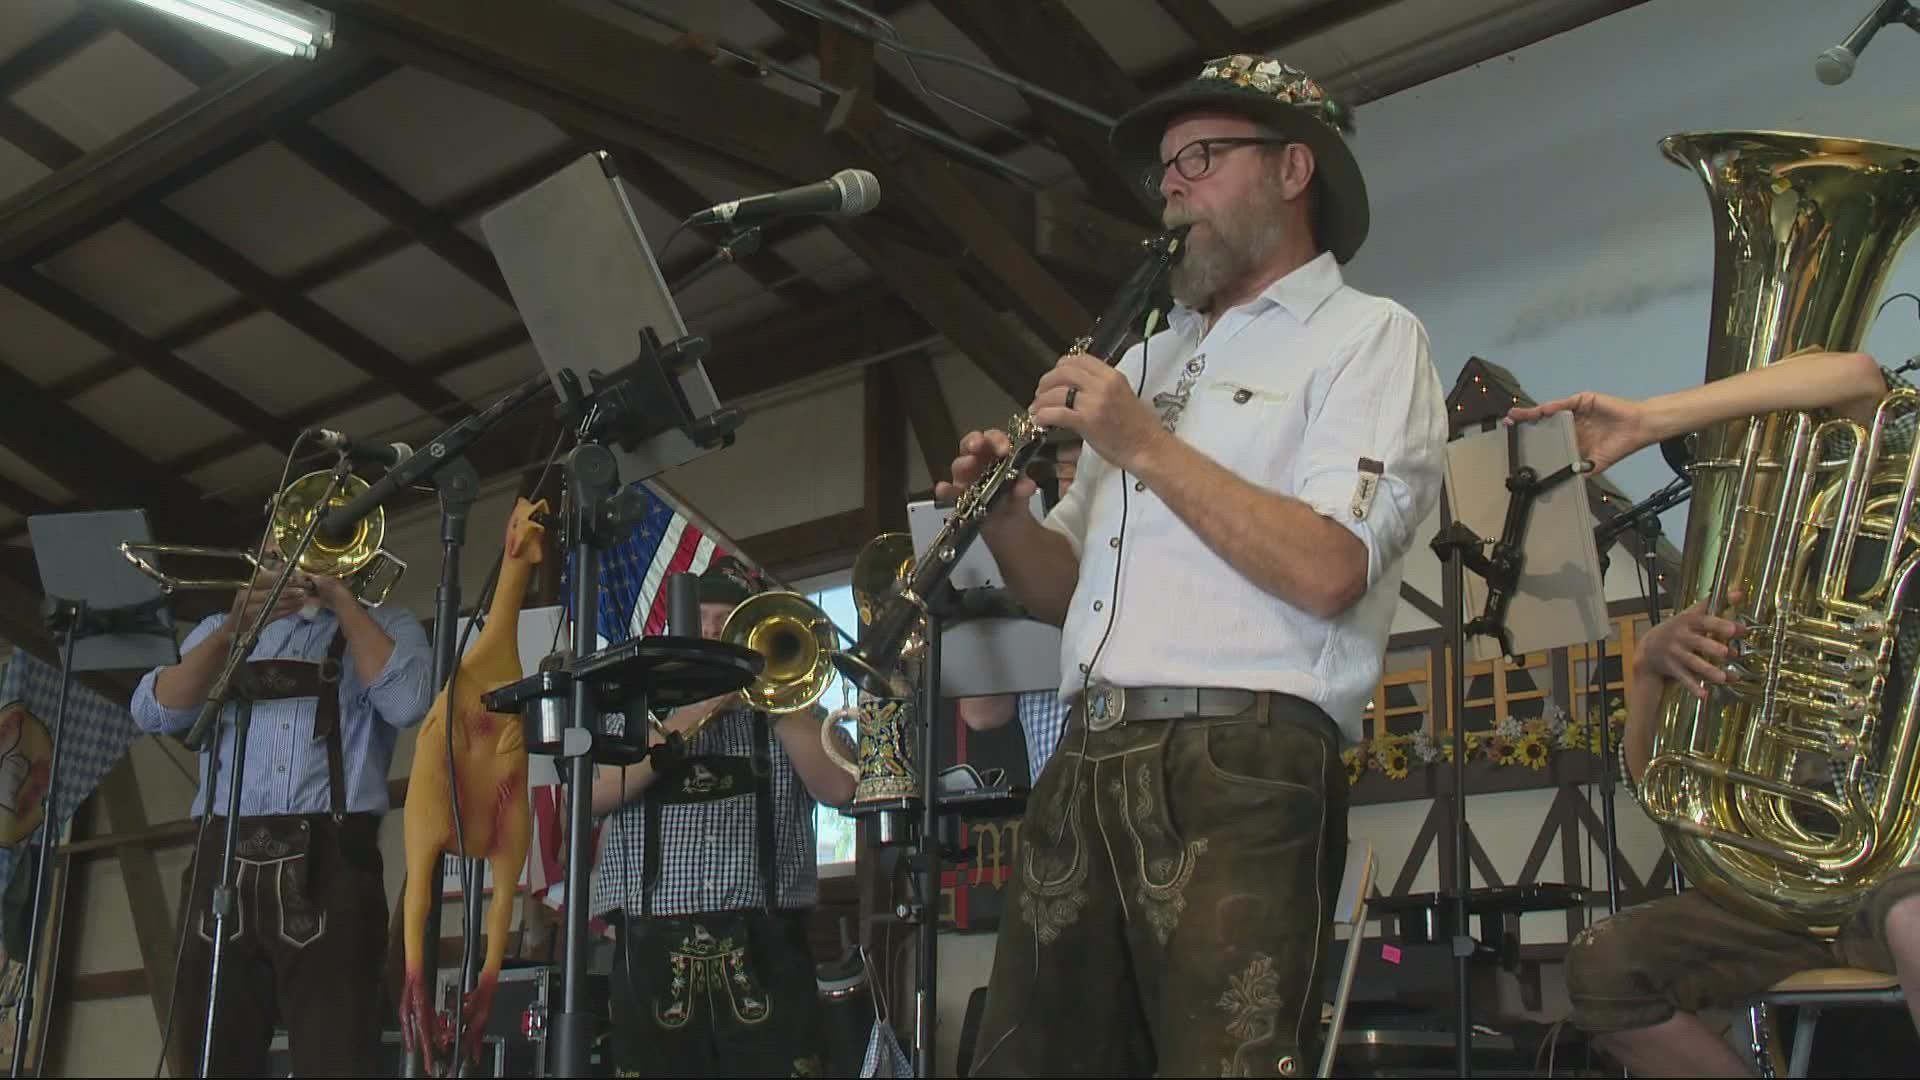 Break out the lederhosen and grab a pint! Thursday marks the beginning of the annual Oktoberfest in Mount Angel! KGW's Drew Carney was there to sample the fun!